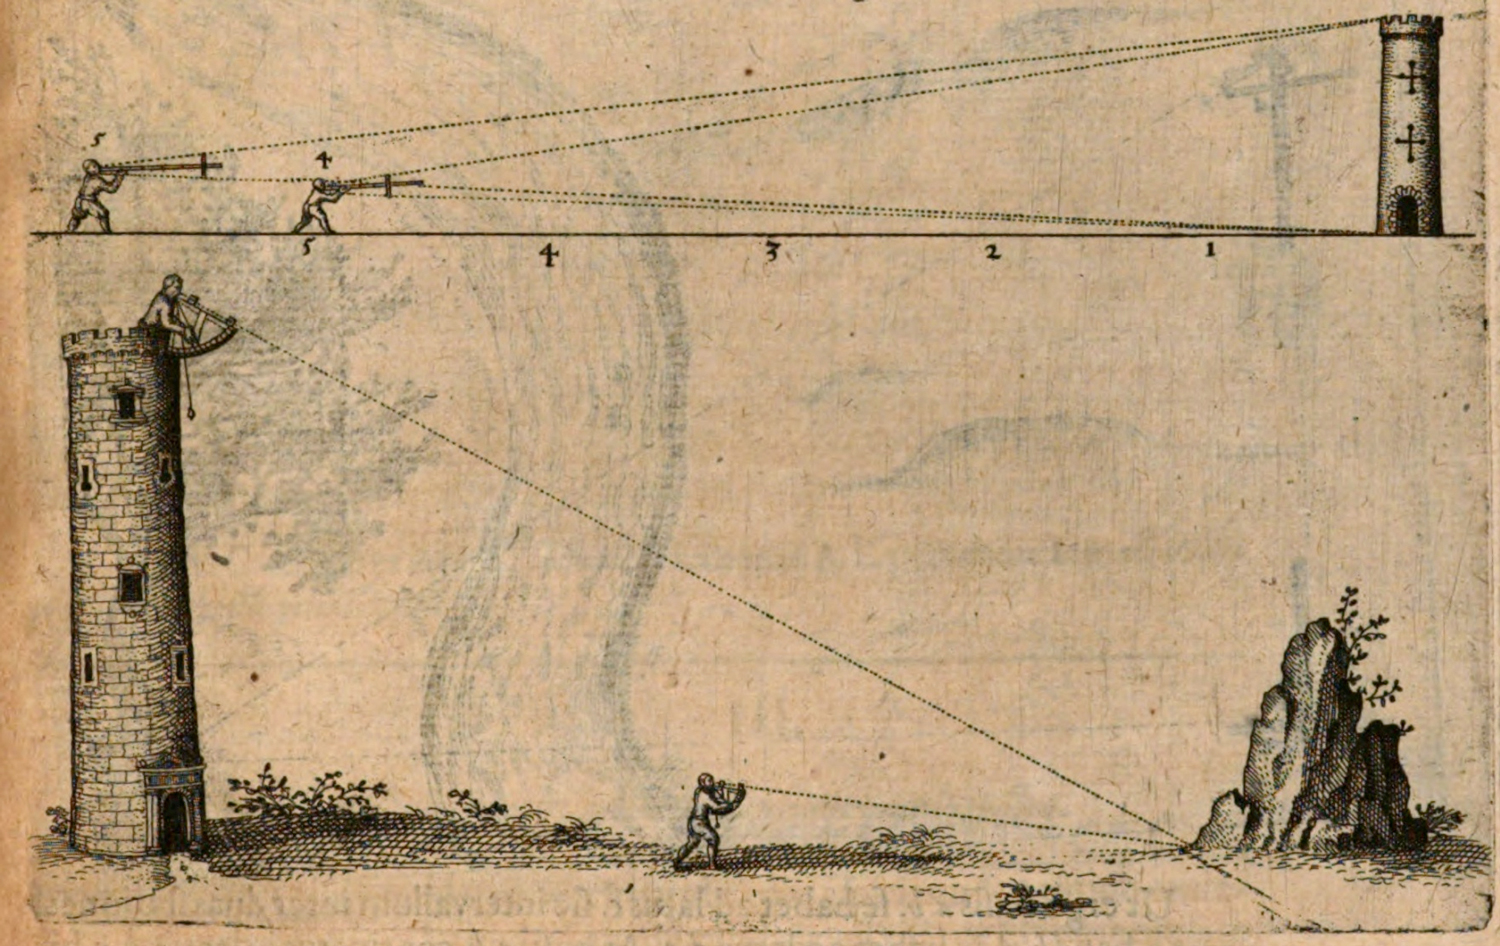 A diagram from De naturae simia that consists of two images. On top: two men from different locations measure the height of a stone tower by holding out a cross-like instrument known as Jacob’s staff to their head. Lines traced from each point to the tower help gauge the measurements. Below the first image: a man atop a stone tower uses a quadrant to measure the distance between the tower and a faraway rock. Another man closer to the rock uses the same instrument to measure his own distance to it.